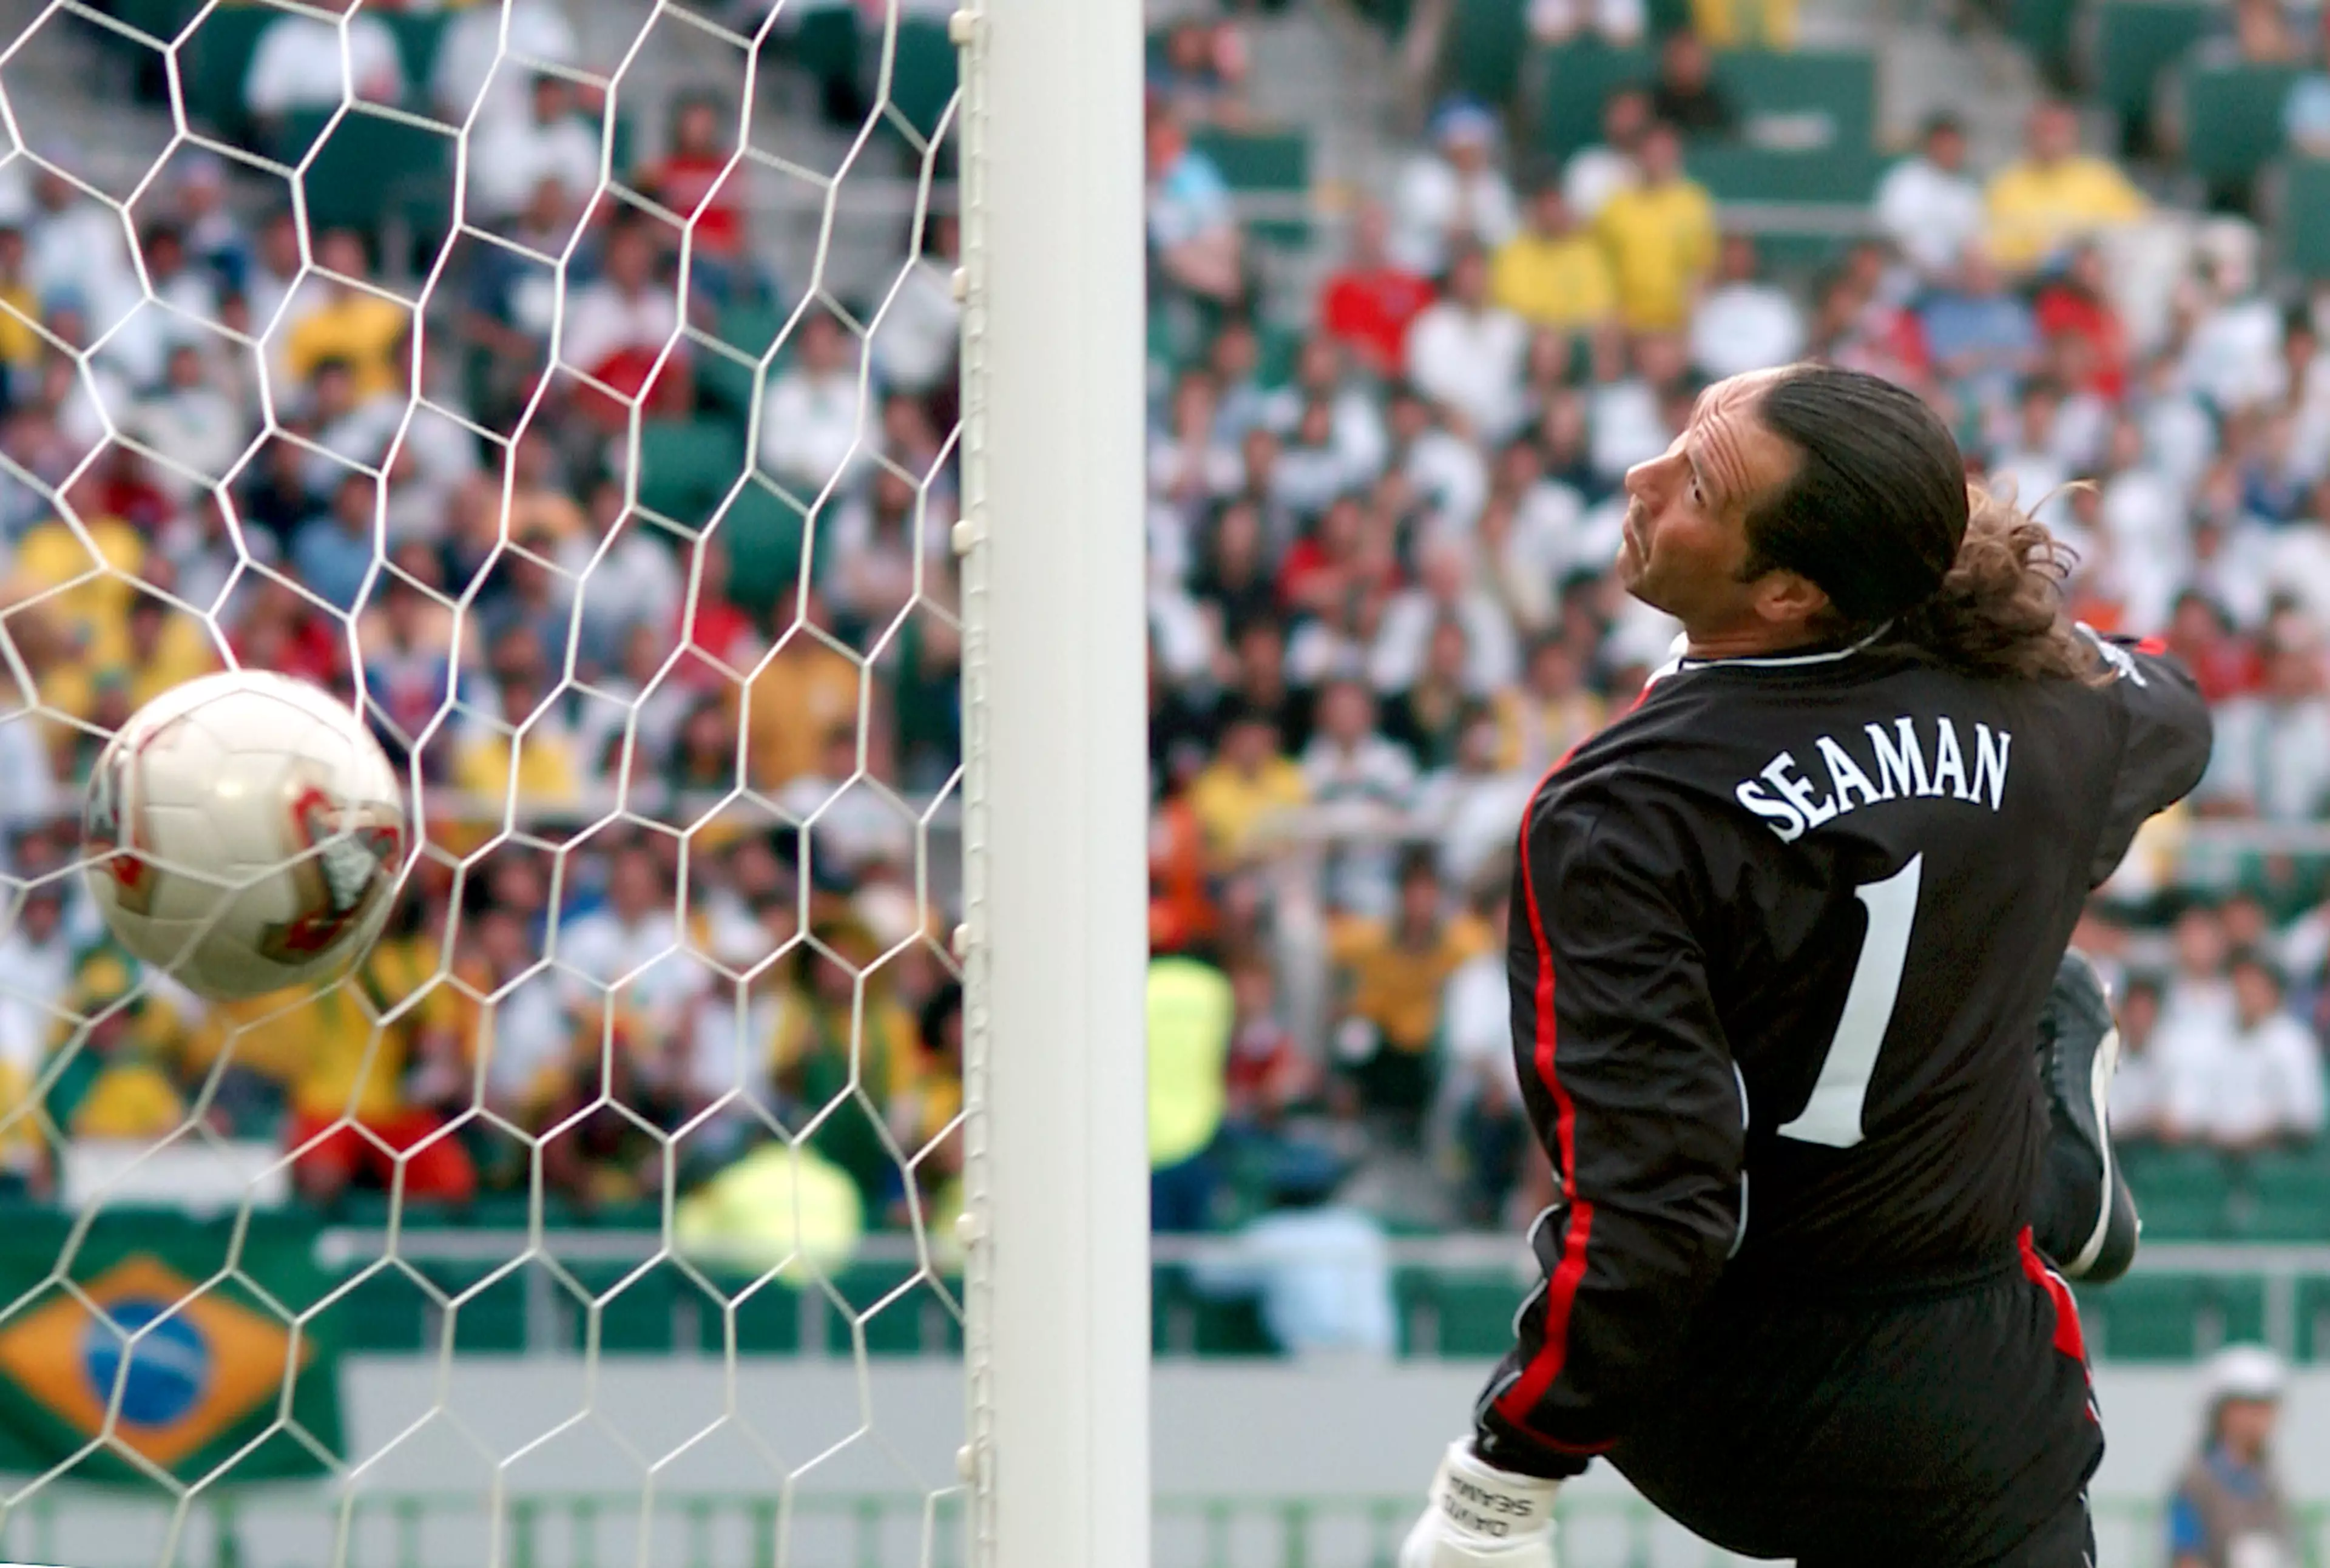 Seaman flops back and just watches on. Image: PA Images